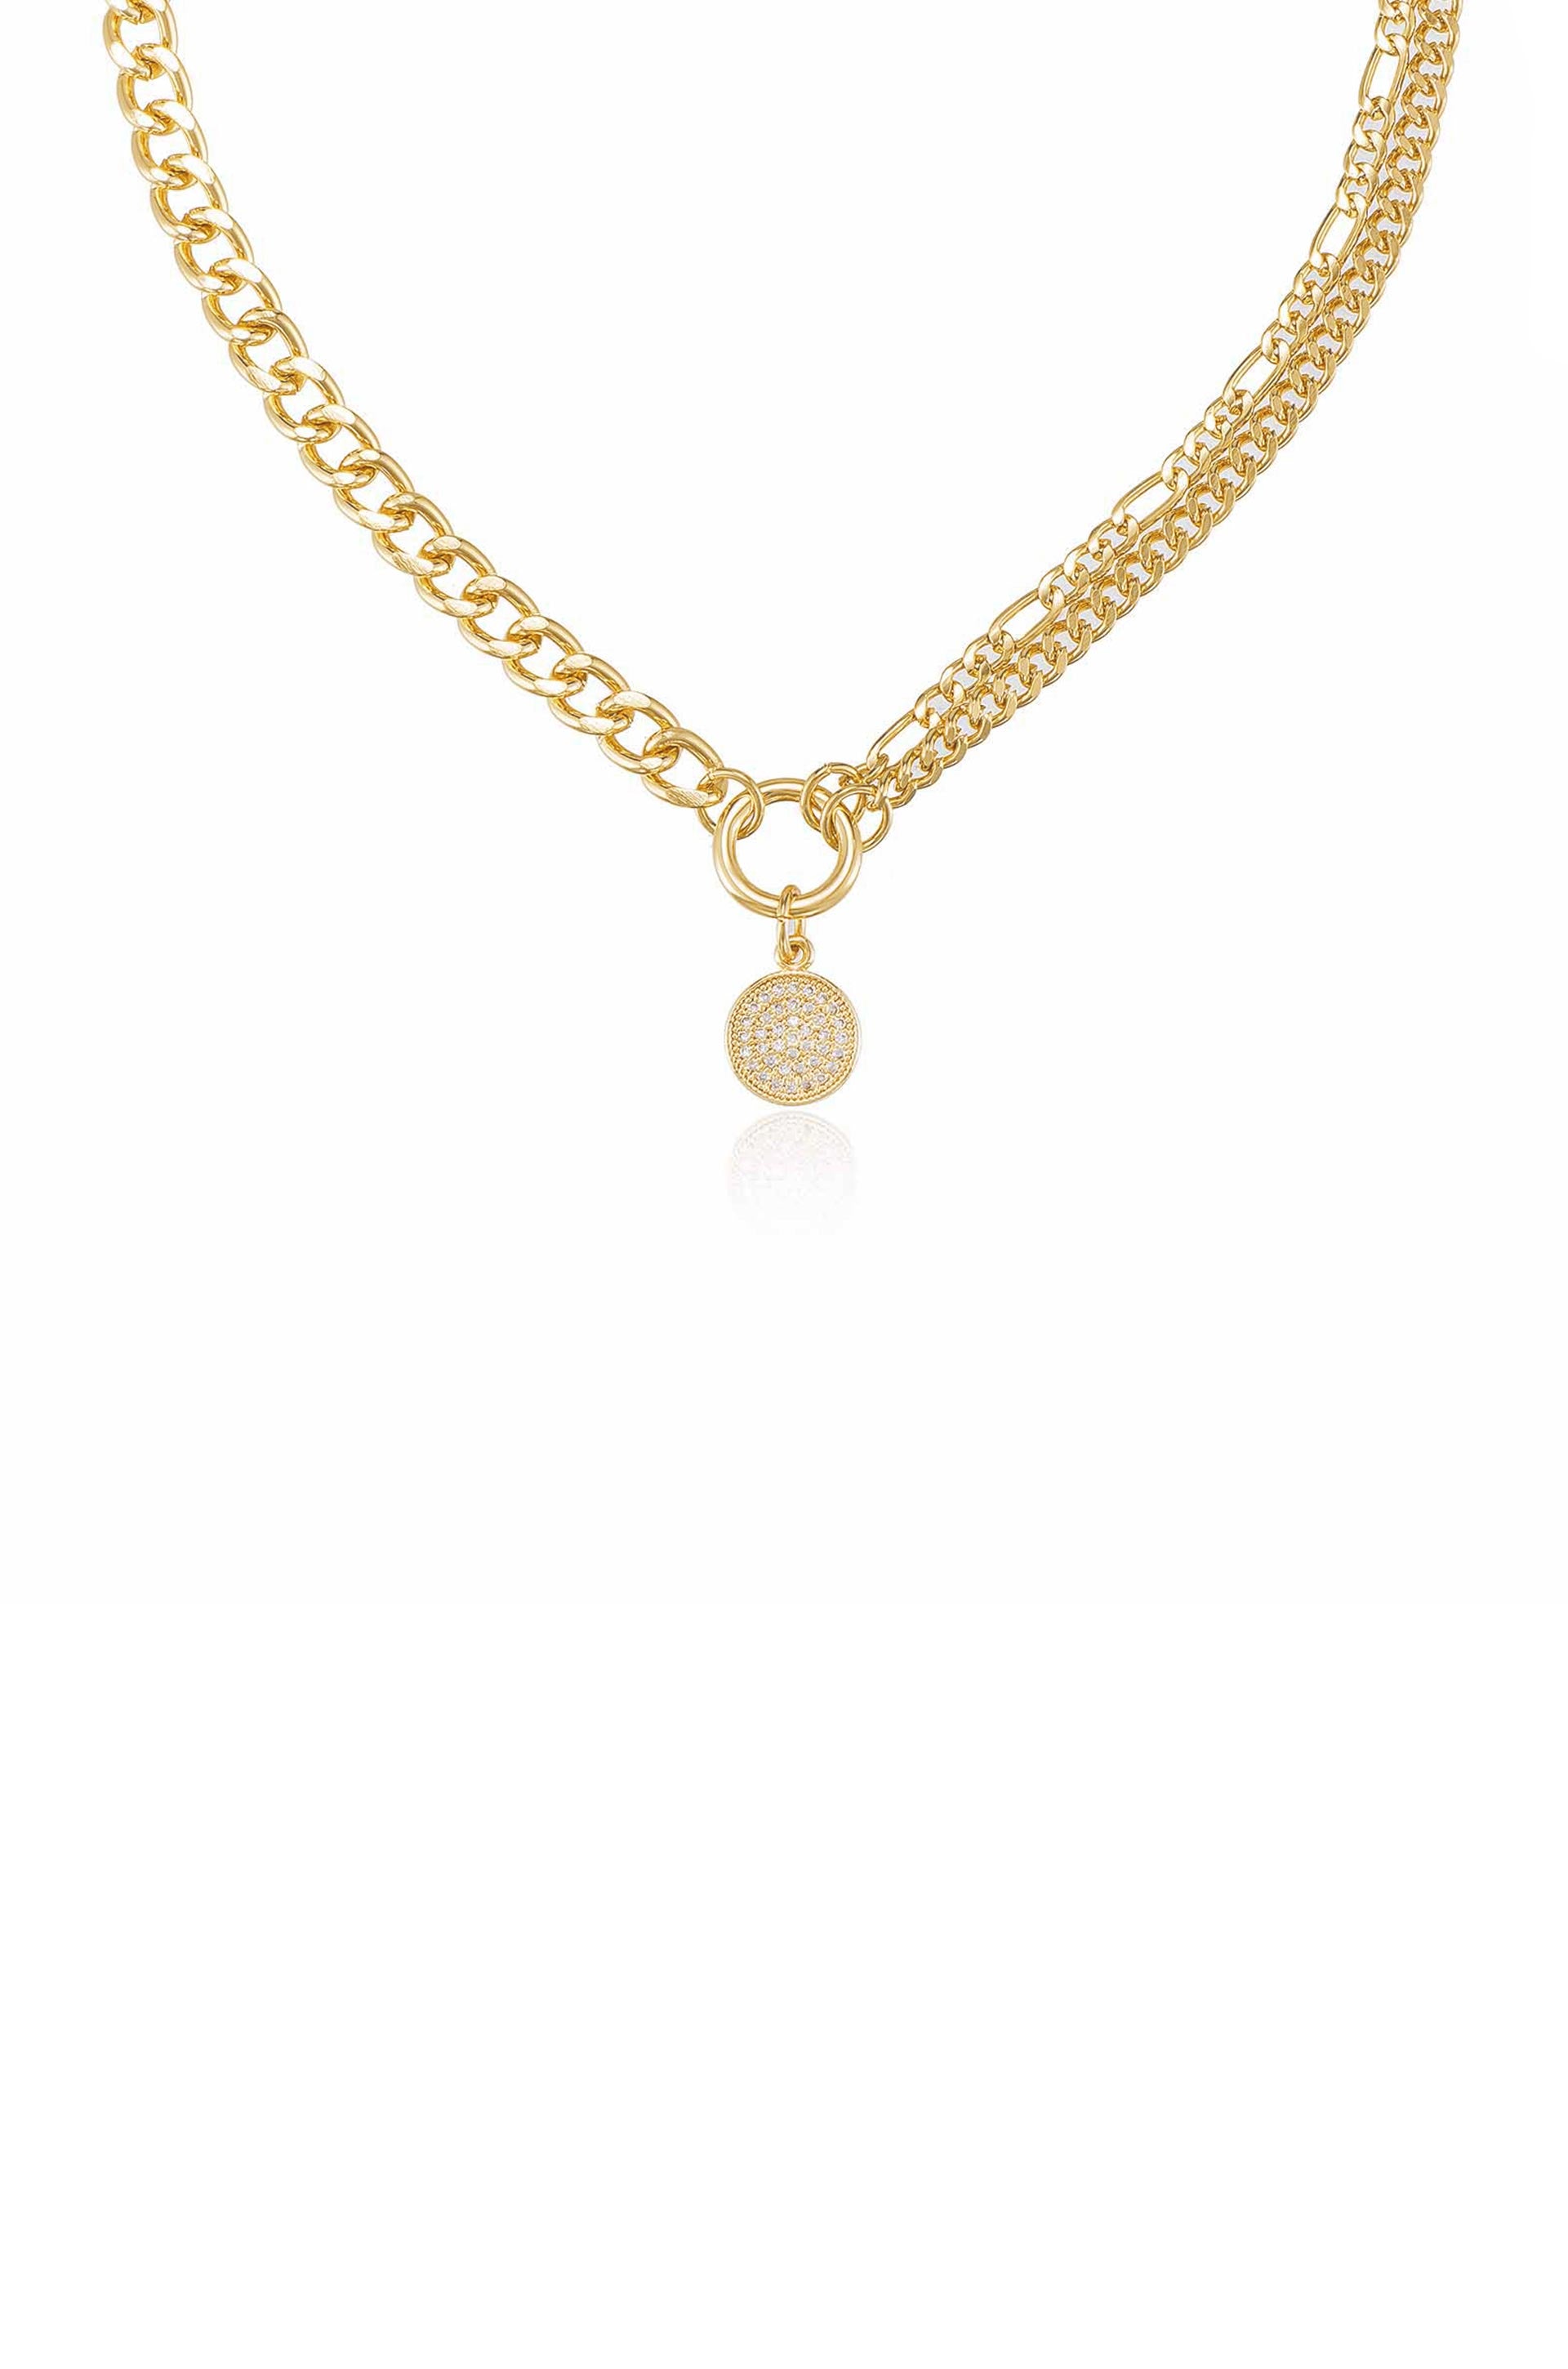 Three Chains 18k Gold Plated Necklace